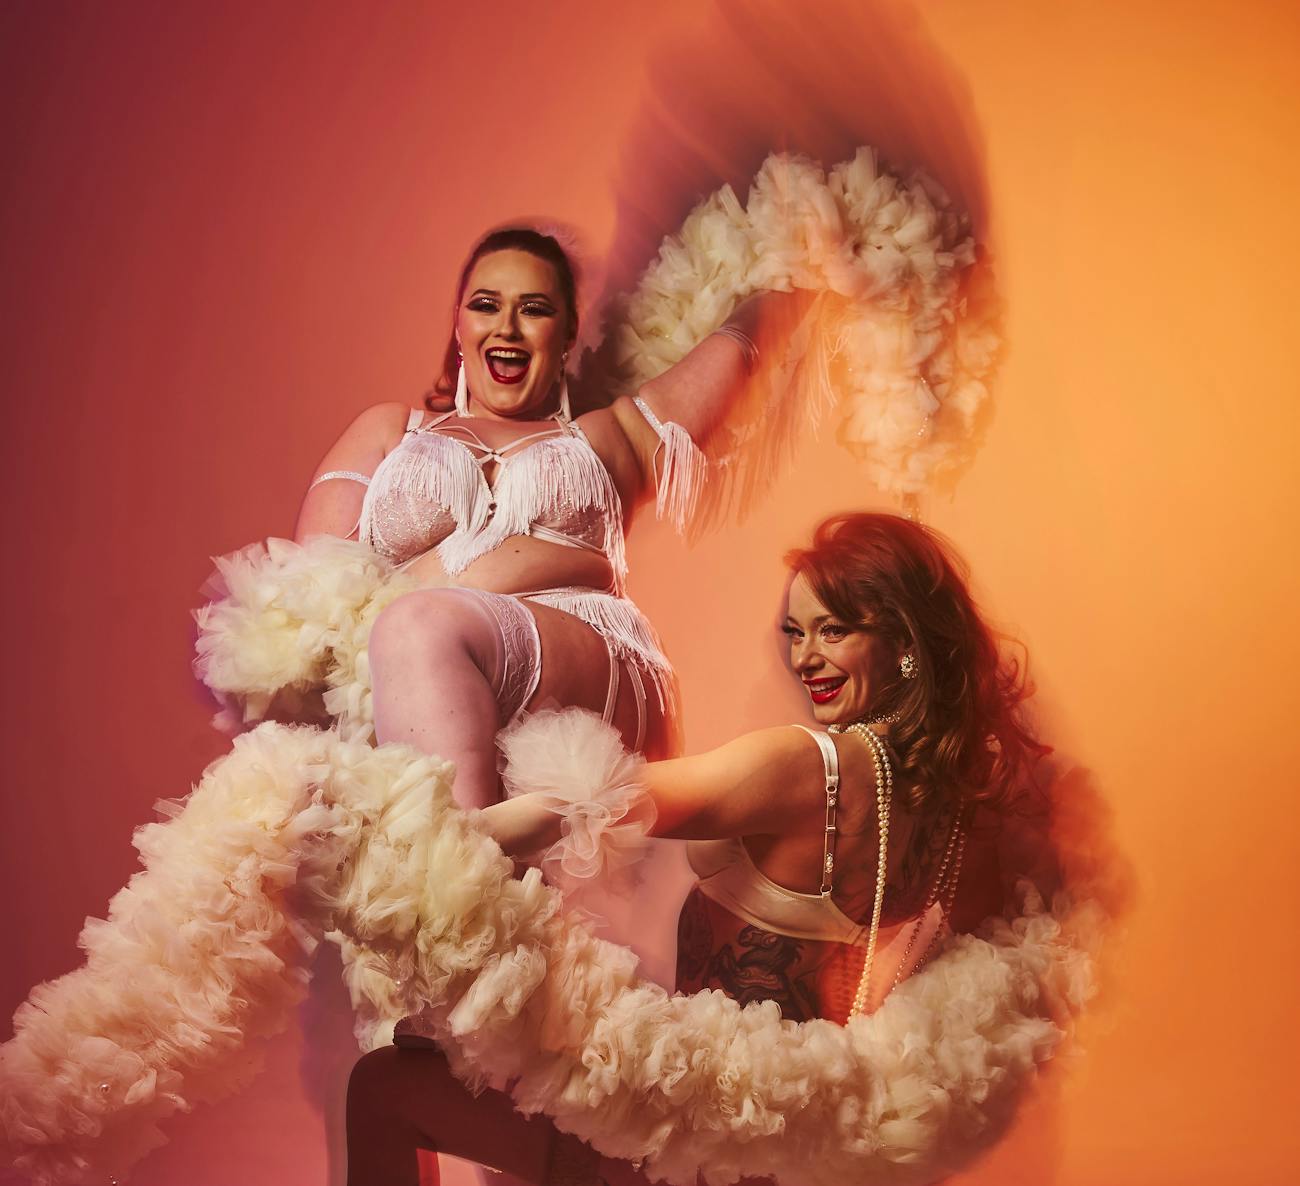 Two burlesque beauties pose together in front of an orange background. They are both dark haired and wearing white burlesque outfits with beads and fringe. They are both holding white fluffy boas that they wrap around themselves.